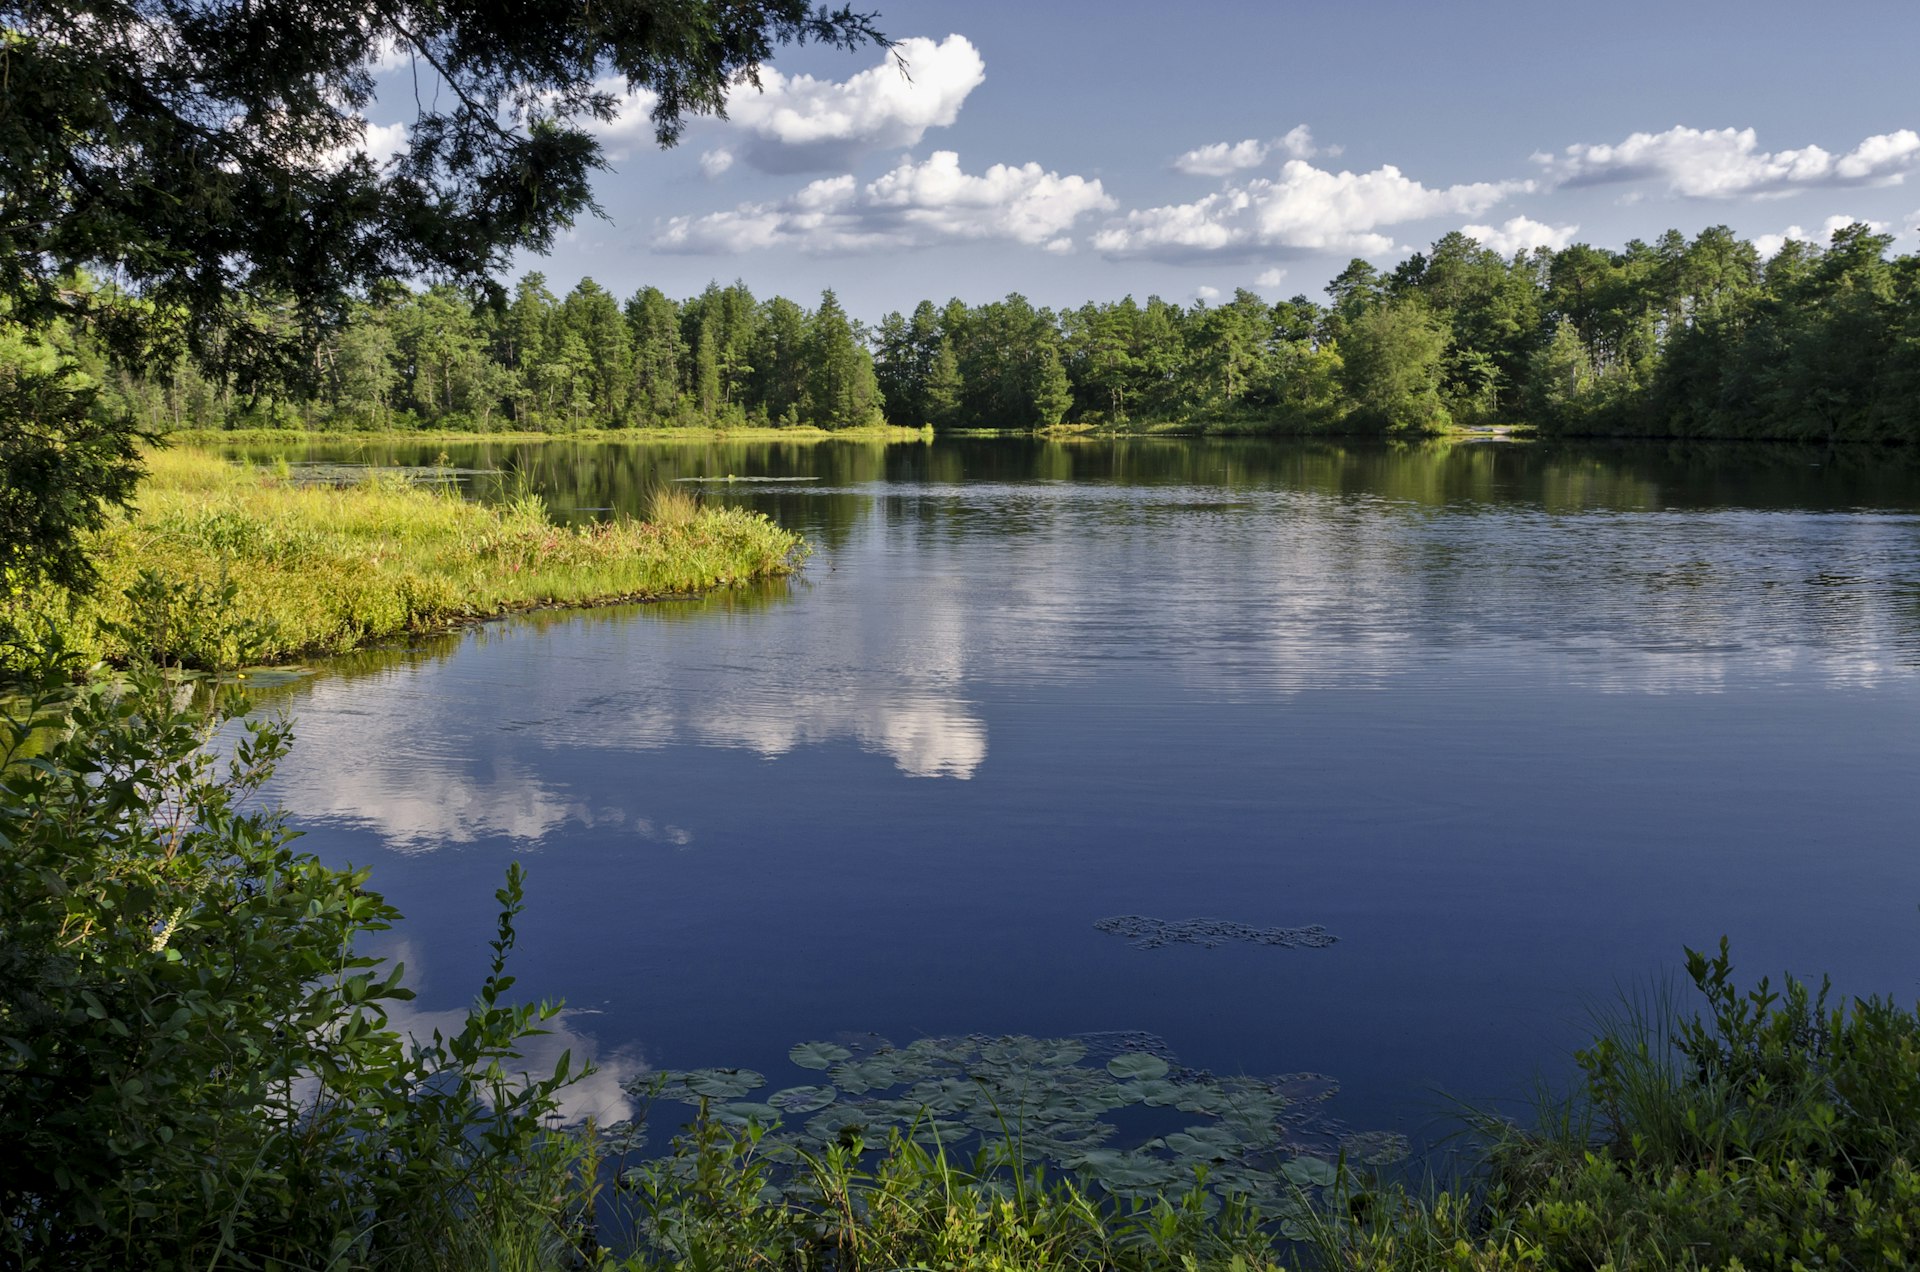 A body of water surrounded by trees in Pine Barrens